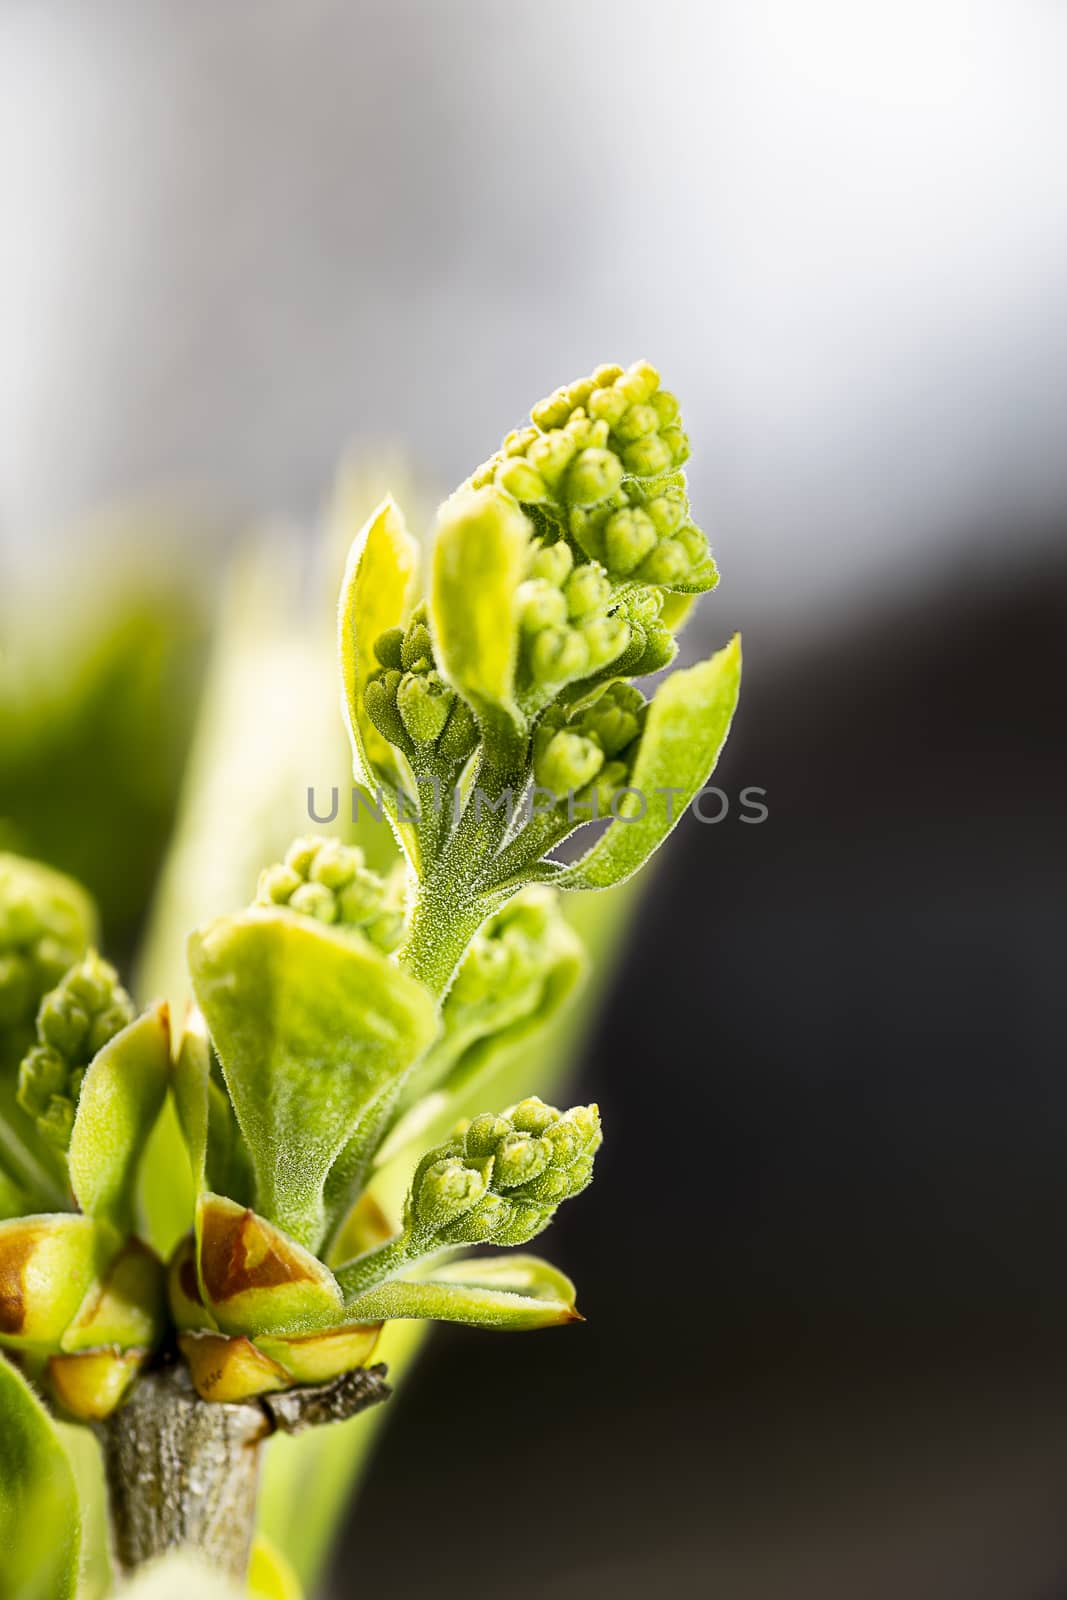 Close up of a lilac flower bud that has yet to blossom into a flower